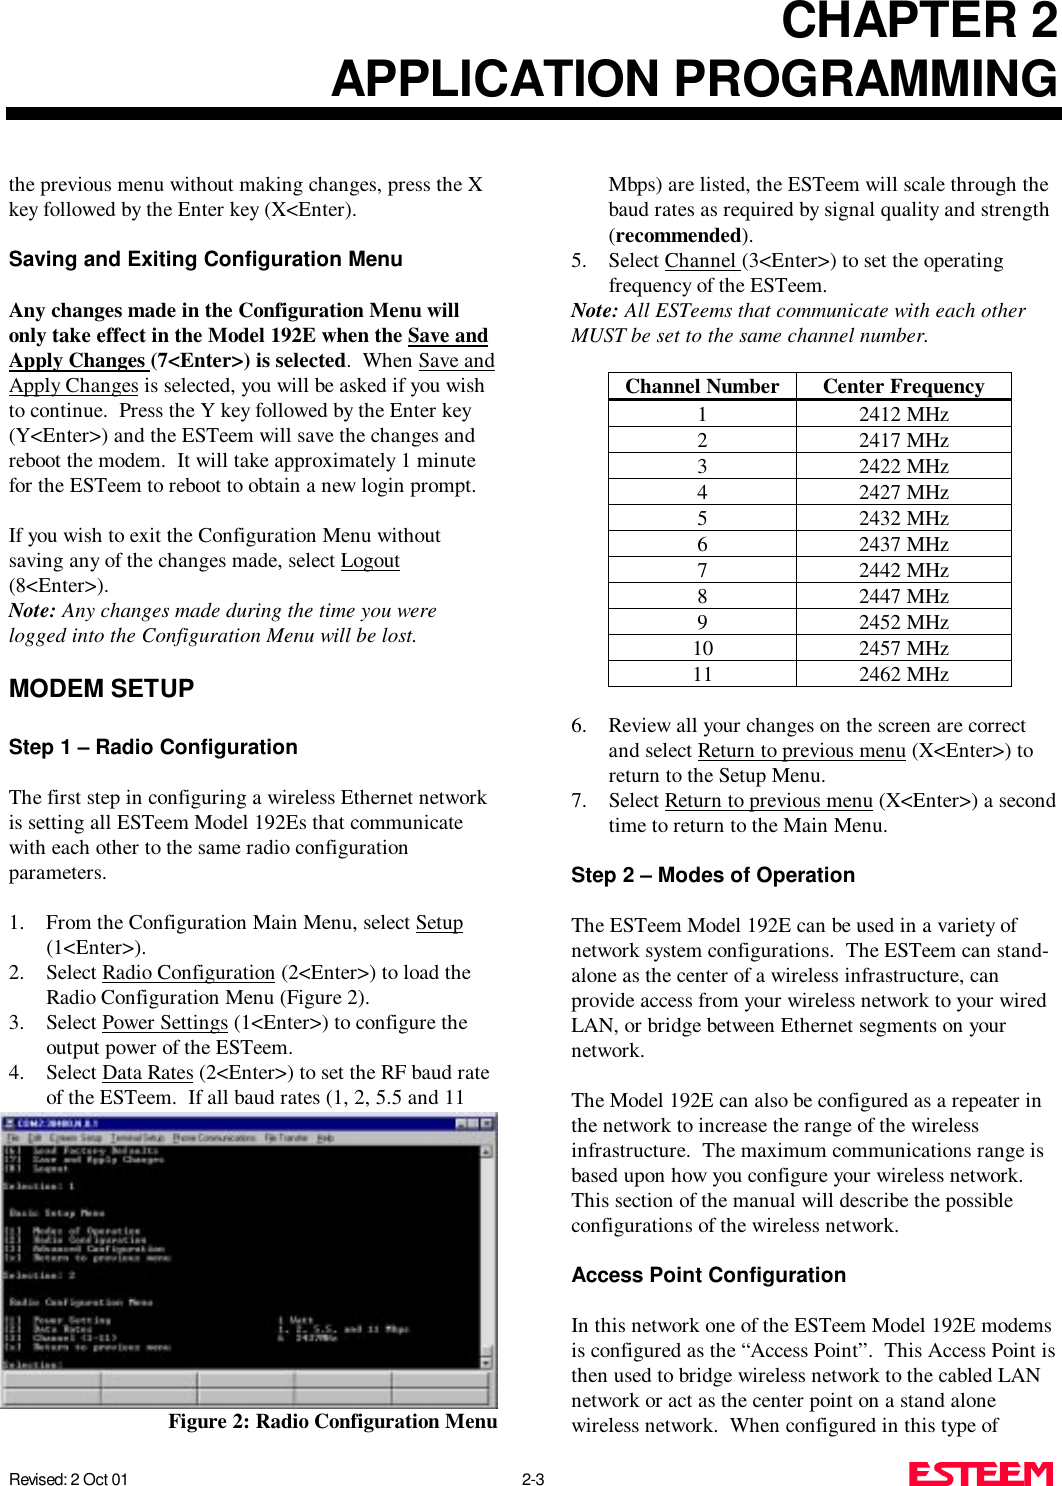 CHAPTER 2APPLICATION PROGRAMMINGRevised: 2 Oct 01 2-3the previous menu without making changes, press the Xkey followed by the Enter key (X&lt;Enter).Saving and Exiting Configuration MenuAny changes made in the Configuration Menu willonly take effect in the Model 192E when the Save andApply Changes (7&lt;Enter&gt;) is selected.  When Save andApply Changes is selected, you will be asked if you wishto continue.  Press the Y key followed by the Enter key(Y&lt;Enter&gt;) and the ESTeem will save the changes andreboot the modem.  It will take approximately 1 minutefor the ESTeem to reboot to obtain a new login prompt.If you wish to exit the Configuration Menu withoutsaving any of the changes made, select Logout(8&lt;Enter&gt;). Note: Any changes made during the time you werelogged into the Configuration Menu will be lost.MODEM SETUPStep 1 – Radio ConfigurationThe first step in configuring a wireless Ethernet networkis setting all ESTeem Model 192Es that communicatewith each other to the same radio configurationparameters. 1. From the Configuration Main Menu, select Setup(1&lt;Enter&gt;).2. Select Radio Configuration (2&lt;Enter&gt;) to load theRadio Configuration Menu (Figure 2).3. Select Power Settings (1&lt;Enter&gt;) to configure theoutput power of the ESTeem. 4. Select Data Rates (2&lt;Enter&gt;) to set the RF baud rateof the ESTeem.  If all baud rates (1, 2, 5.5 and 11Mbps) are listed, the ESTeem will scale through thebaud rates as required by signal quality and strength(recommended).5. Select Channel (3&lt;Enter&gt;) to set the operatingfrequency of the ESTeem.Note: All ESTeems that communicate with each otherMUST be set to the same channel number.Channel Number Center Frequency1 2412 MHz2 2417 MHz3 2422 MHz4 2427 MHz5 2432 MHz6 2437 MHz7 2442 MHz8 2447 MHz9 2452 MHz10 2457 MHz11 2462 MHz6. Review all your changes on the screen are correctand select Return to previous menu (X&lt;Enter&gt;) toreturn to the Setup Menu.7. Select Return to previous menu (X&lt;Enter&gt;) a secondtime to return to the Main Menu.Step 2 – Modes of OperationThe ESTeem Model 192E can be used in a variety ofnetwork system configurations.  The ESTeem can stand-alone as the center of a wireless infrastructure, canprovide access from your wireless network to your wiredLAN, or bridge between Ethernet segments on yournetwork.The Model 192E can also be configured as a repeater inthe network to increase the range of the wirelessinfrastructure.  The maximum communications range isbased upon how you configure your wireless network. This section of the manual will describe the possibleconfigurations of the wireless network.Access Point ConfigurationIn this network one of the ESTeem Model 192E modemsis configured as the “Access Point”.  This Access Point isthen used to bridge wireless network to the cabled LANnetwork or act as the center point on a stand alonewireless network.  When configured in this type ofFigure 2: Radio Configuration Menu